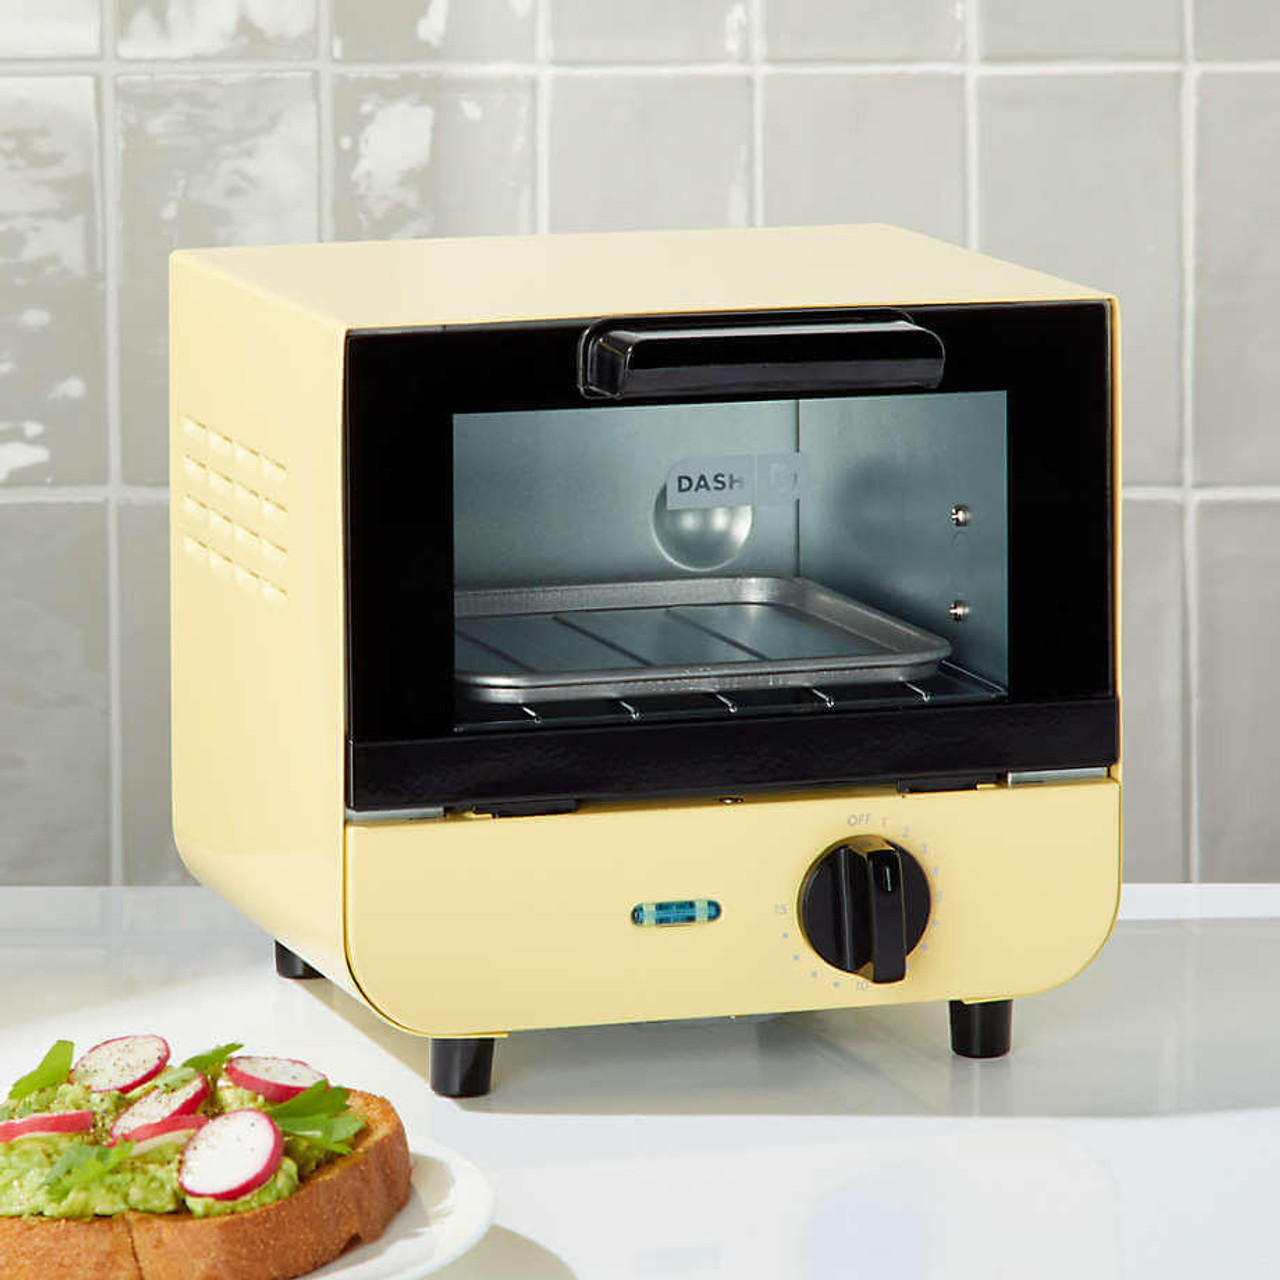 https://cdn11.bigcommerce.com/s-g5ygv2at8j/images/stencil/1280x1280/products/13929/30306/dash-dash-mini-countertop-toaster-oven-7.2-x-6.3-x-7.7-3.2-lbs__24711.1689640796.jpg?c=1